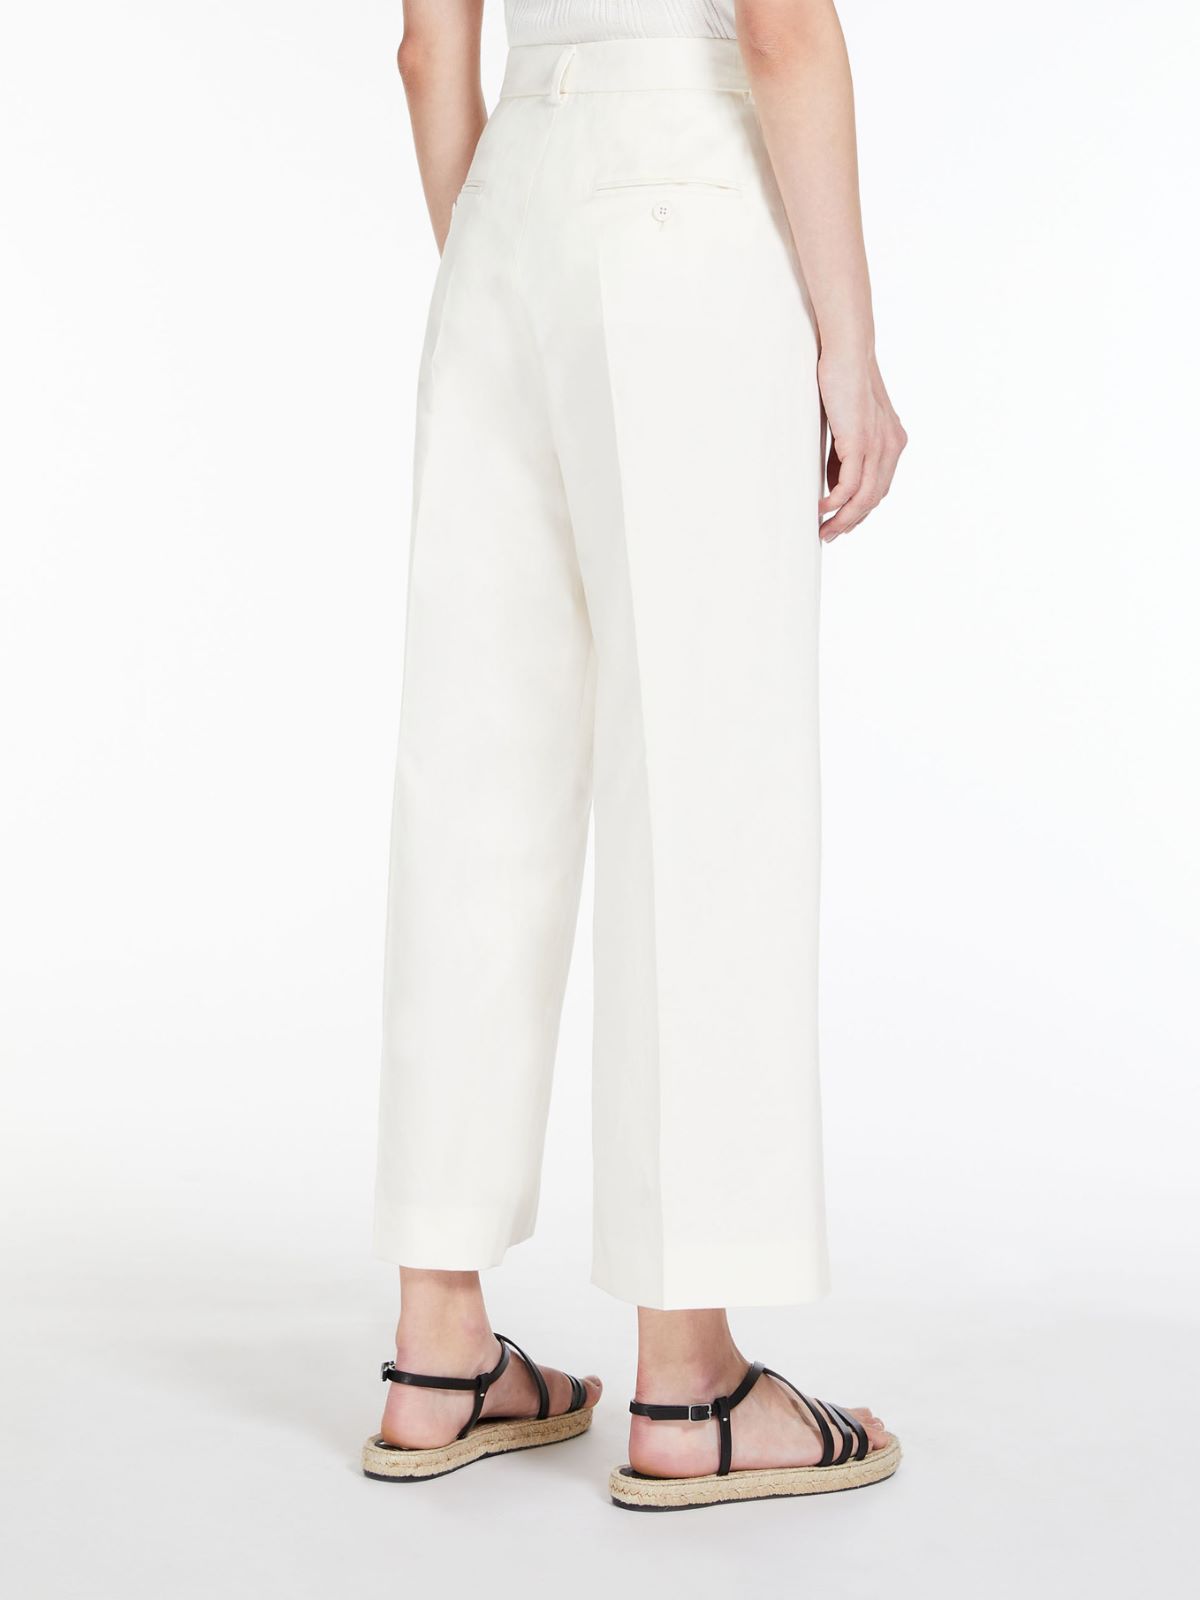 Cotton and linen trousers - IVORY - Weekend Max Mara - 3